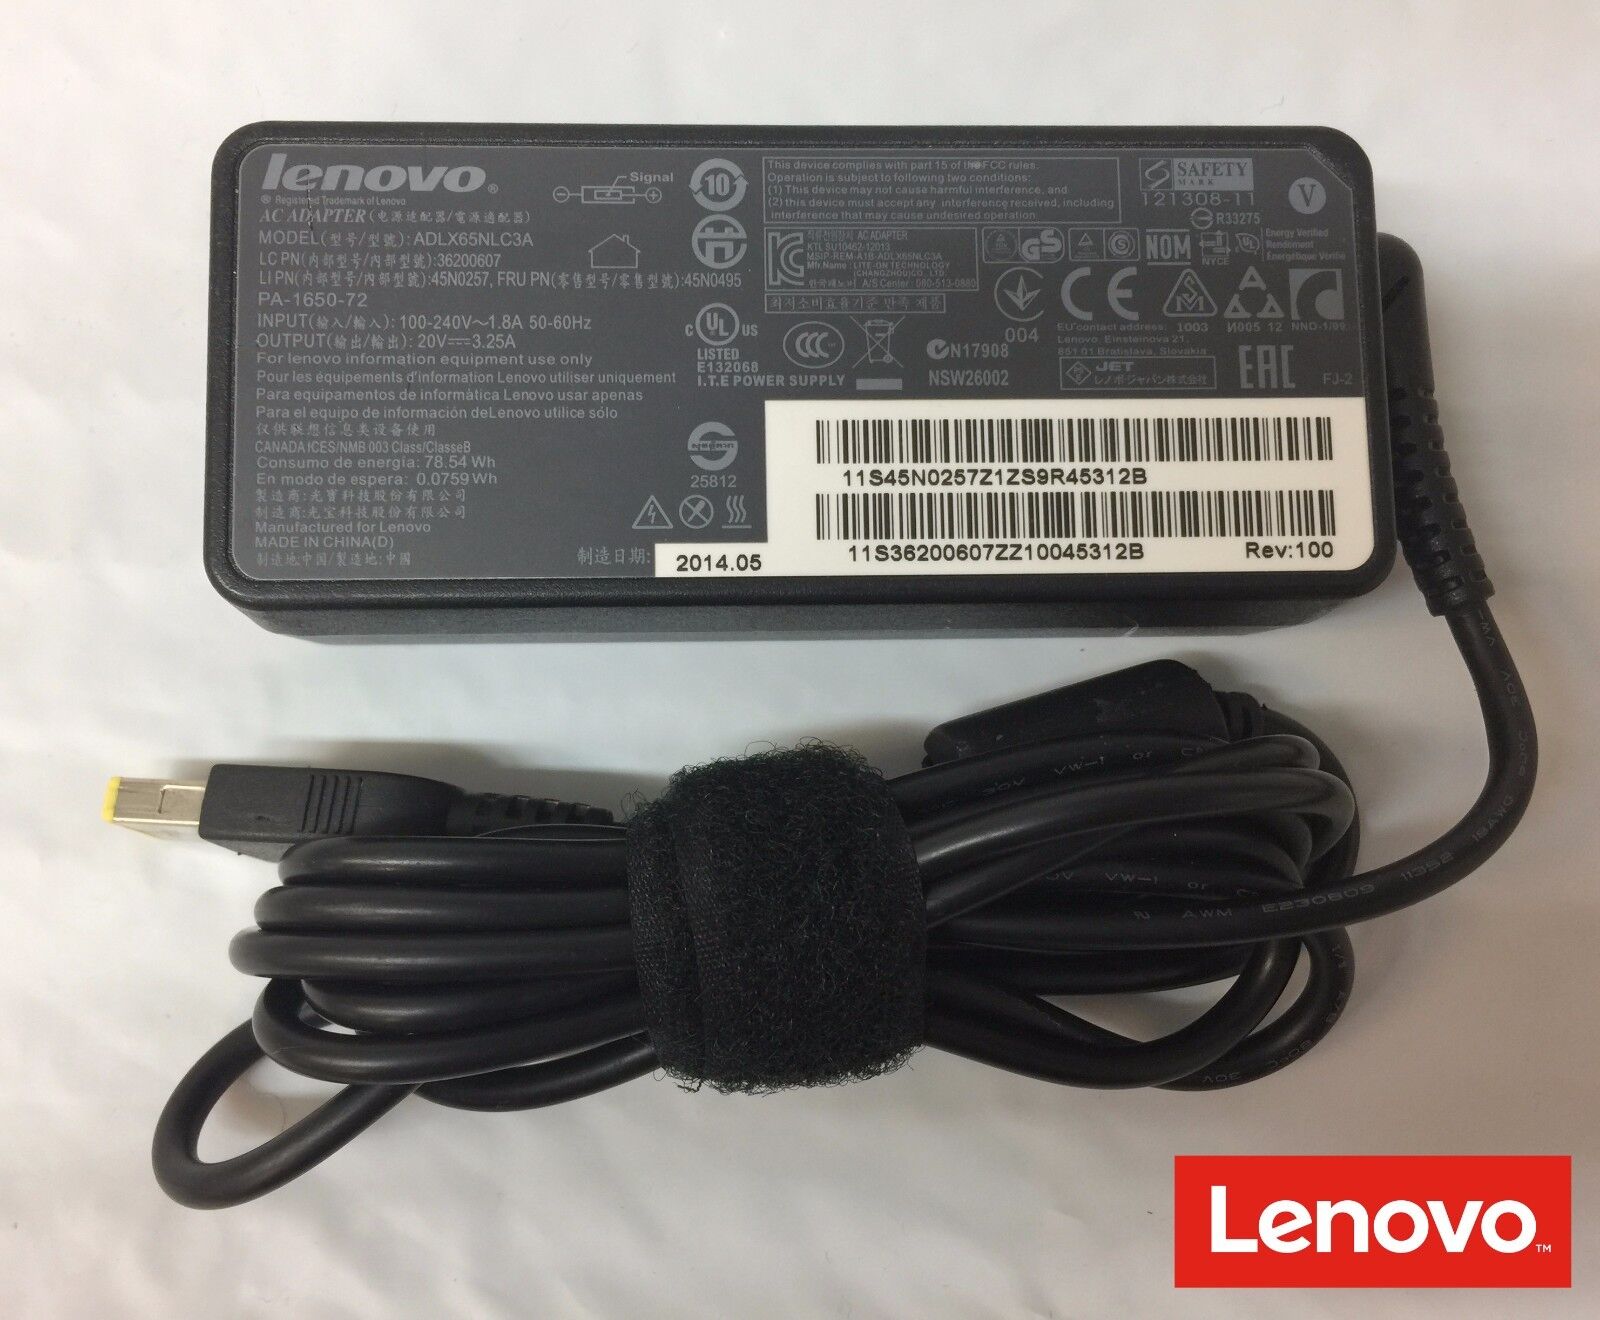 Lot of 10 OEM Lenovo 65W 20V 3.25A Laptop Charger AC/DC Power Adapter Slim-Tip 